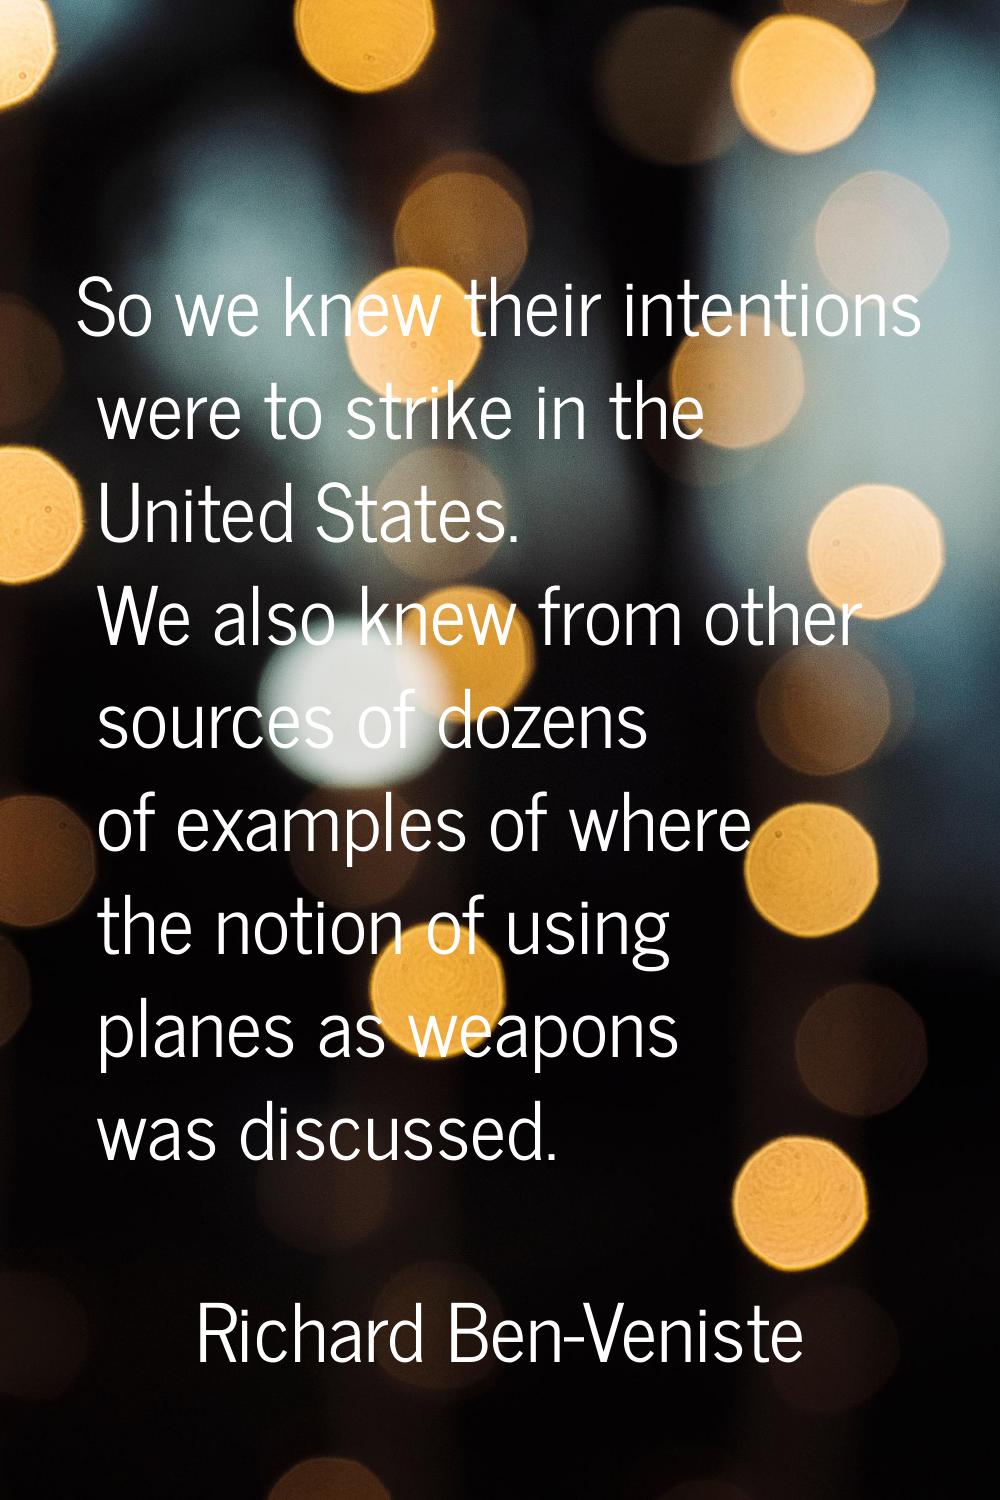 So we knew their intentions were to strike in the United States. We also knew from other sources of